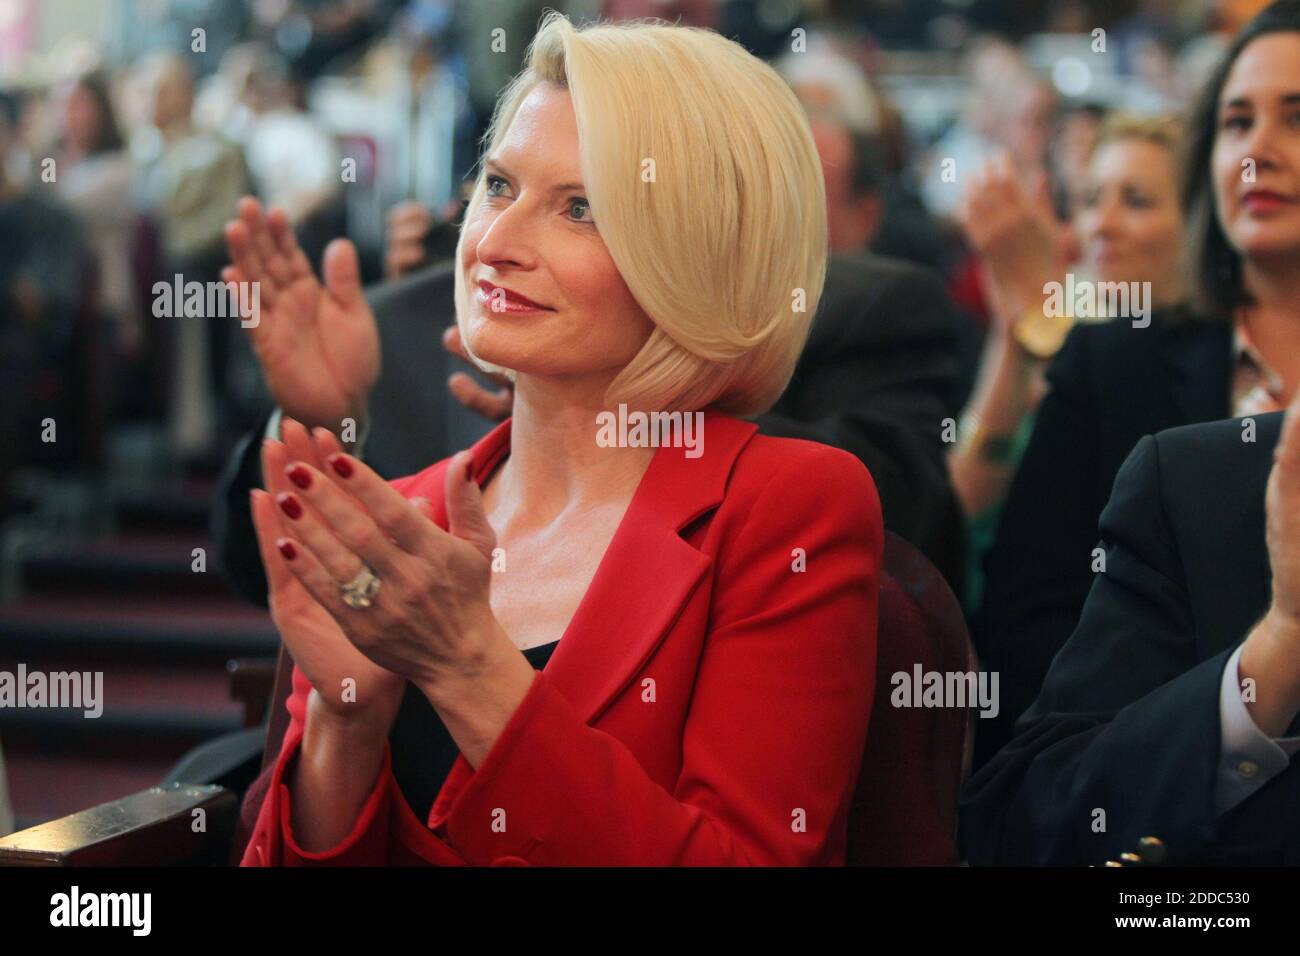 NO FILM, NO VIDEO, NO TV, NO DOCUMENTARY - Callista Gingrich applauds as her husband, Republican presidential candidate Newt Gingrich, delivers a speech at Florida International University's West Dade campus in Miami, Florida, USA, Wednesday, January 25, 2012. Photo by C.W. Griffin/Miami Herald/MCT/ABACAPRESS.COM Stock Photo